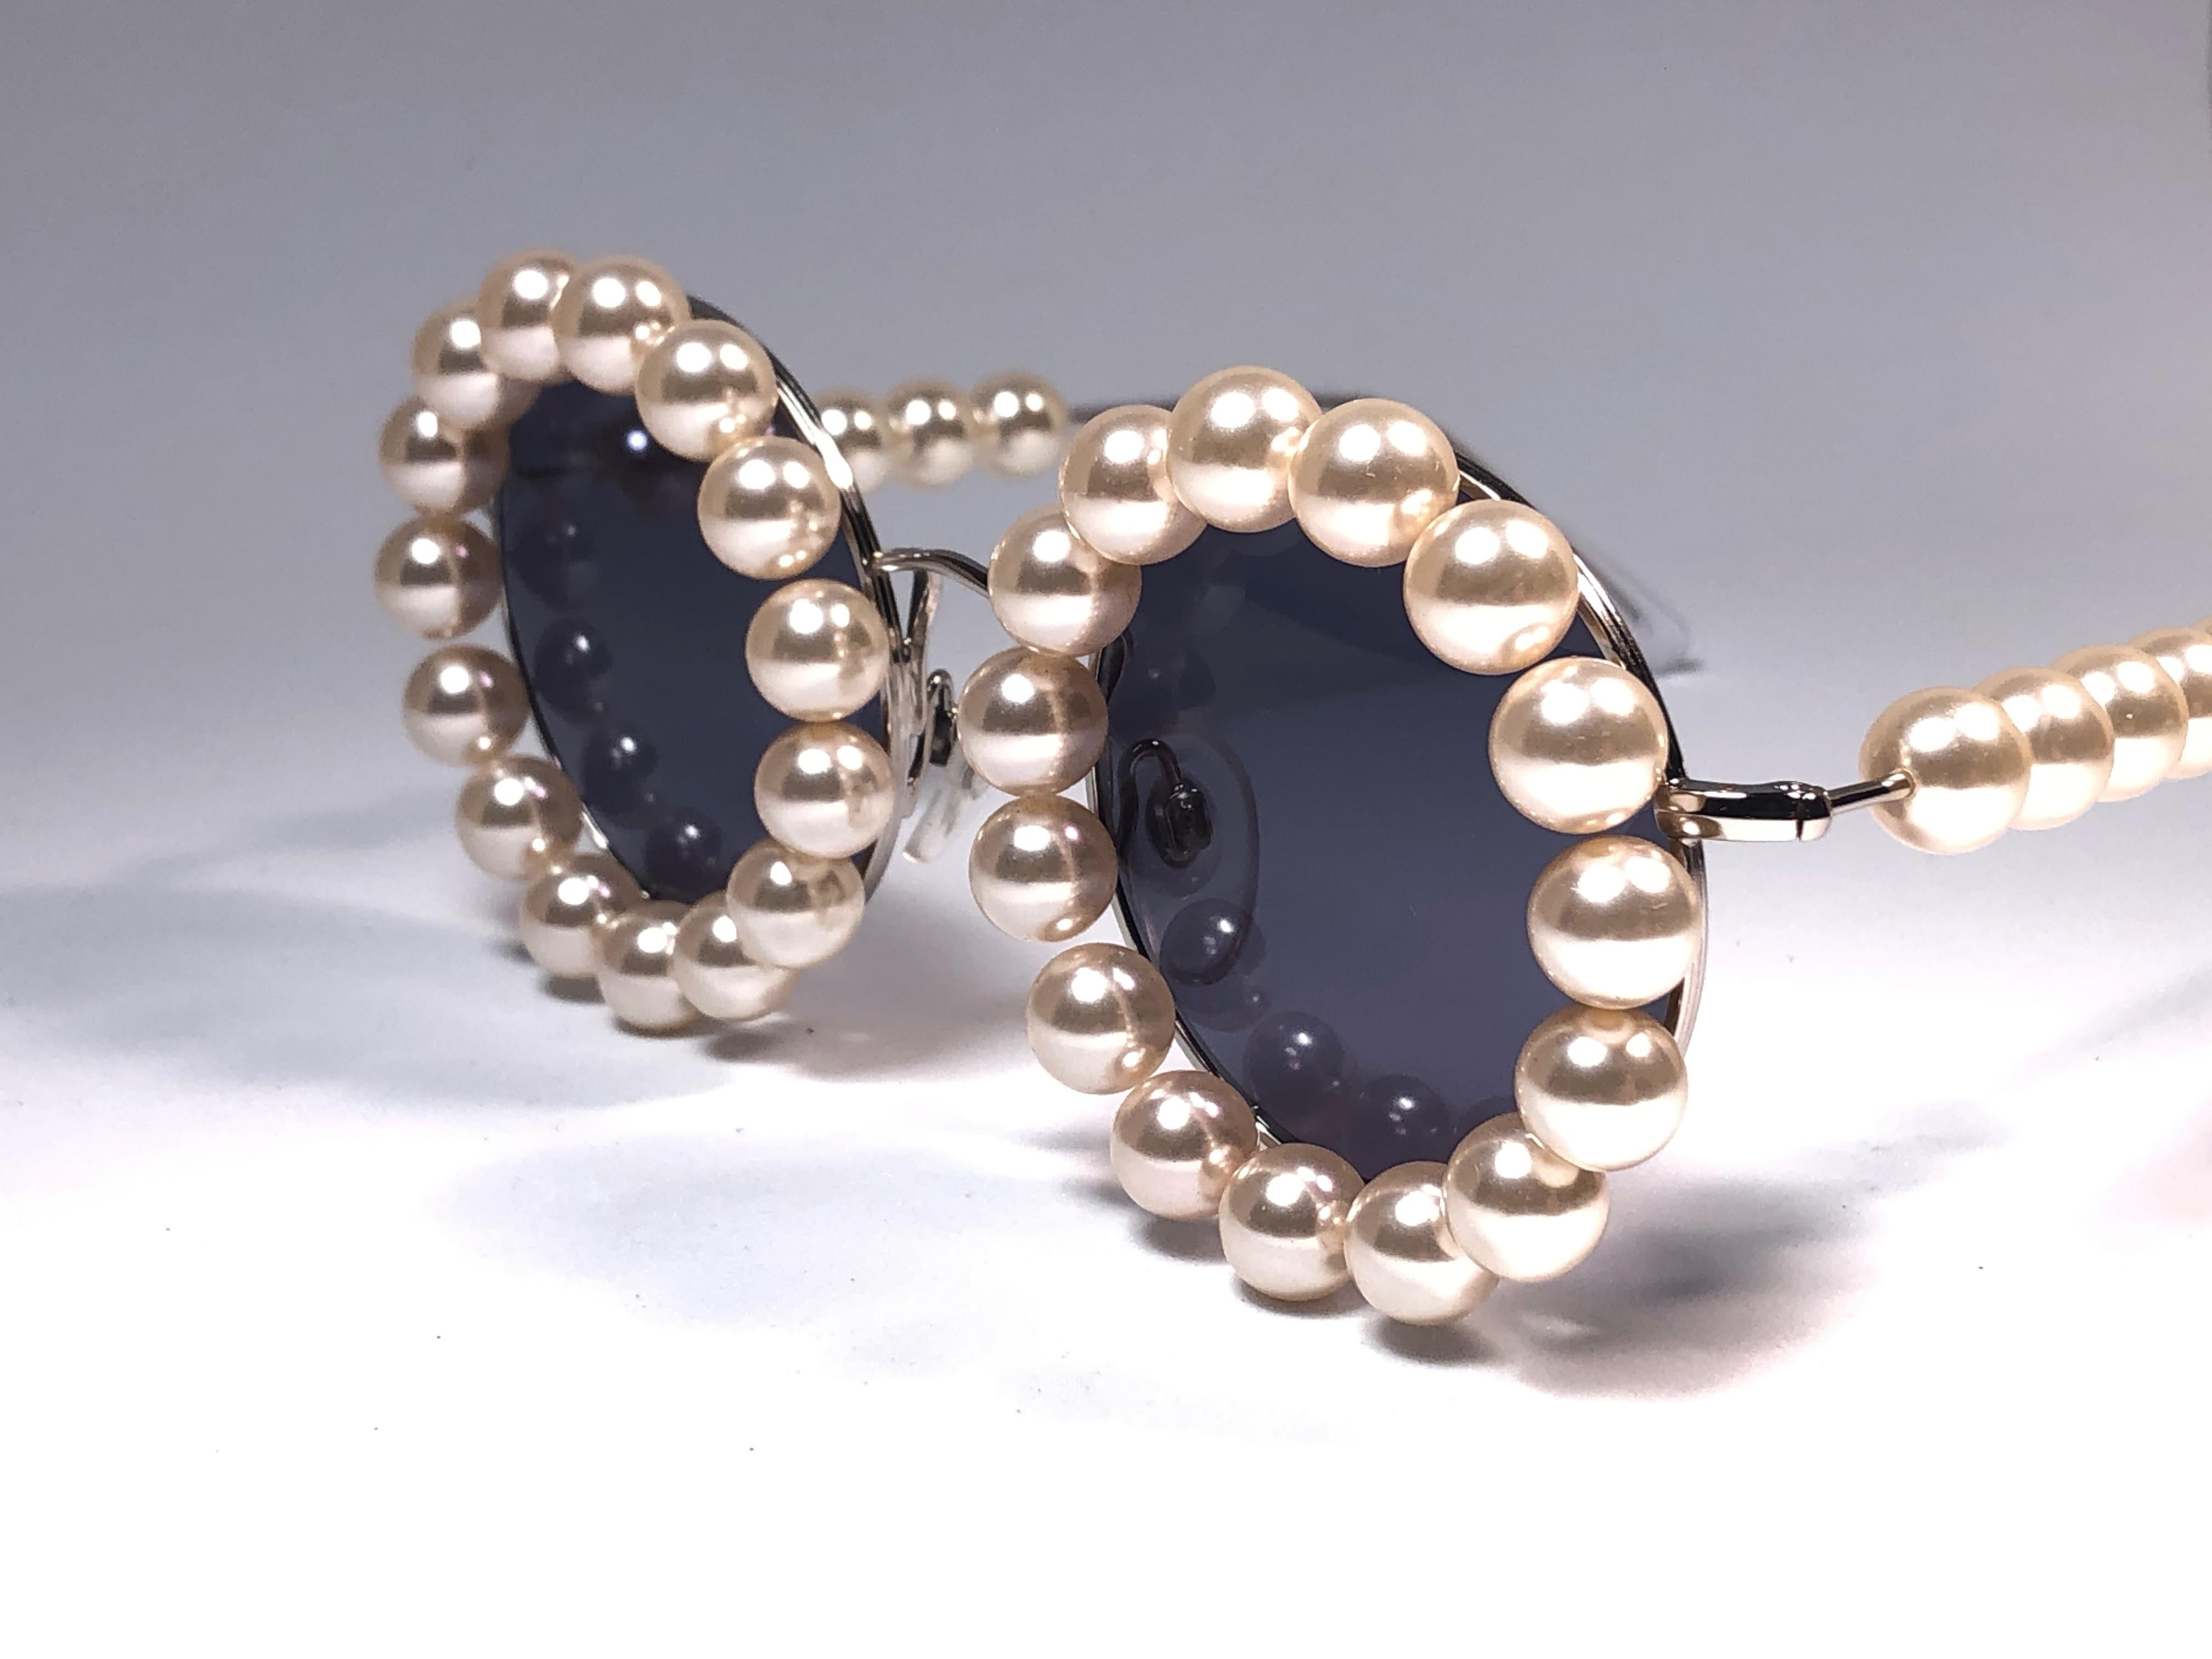 Chanel Vintage Runway Pearls Spring Summer 1994 Sunglasses Made In Italy In Excellent Condition For Sale In Baleares, Baleares